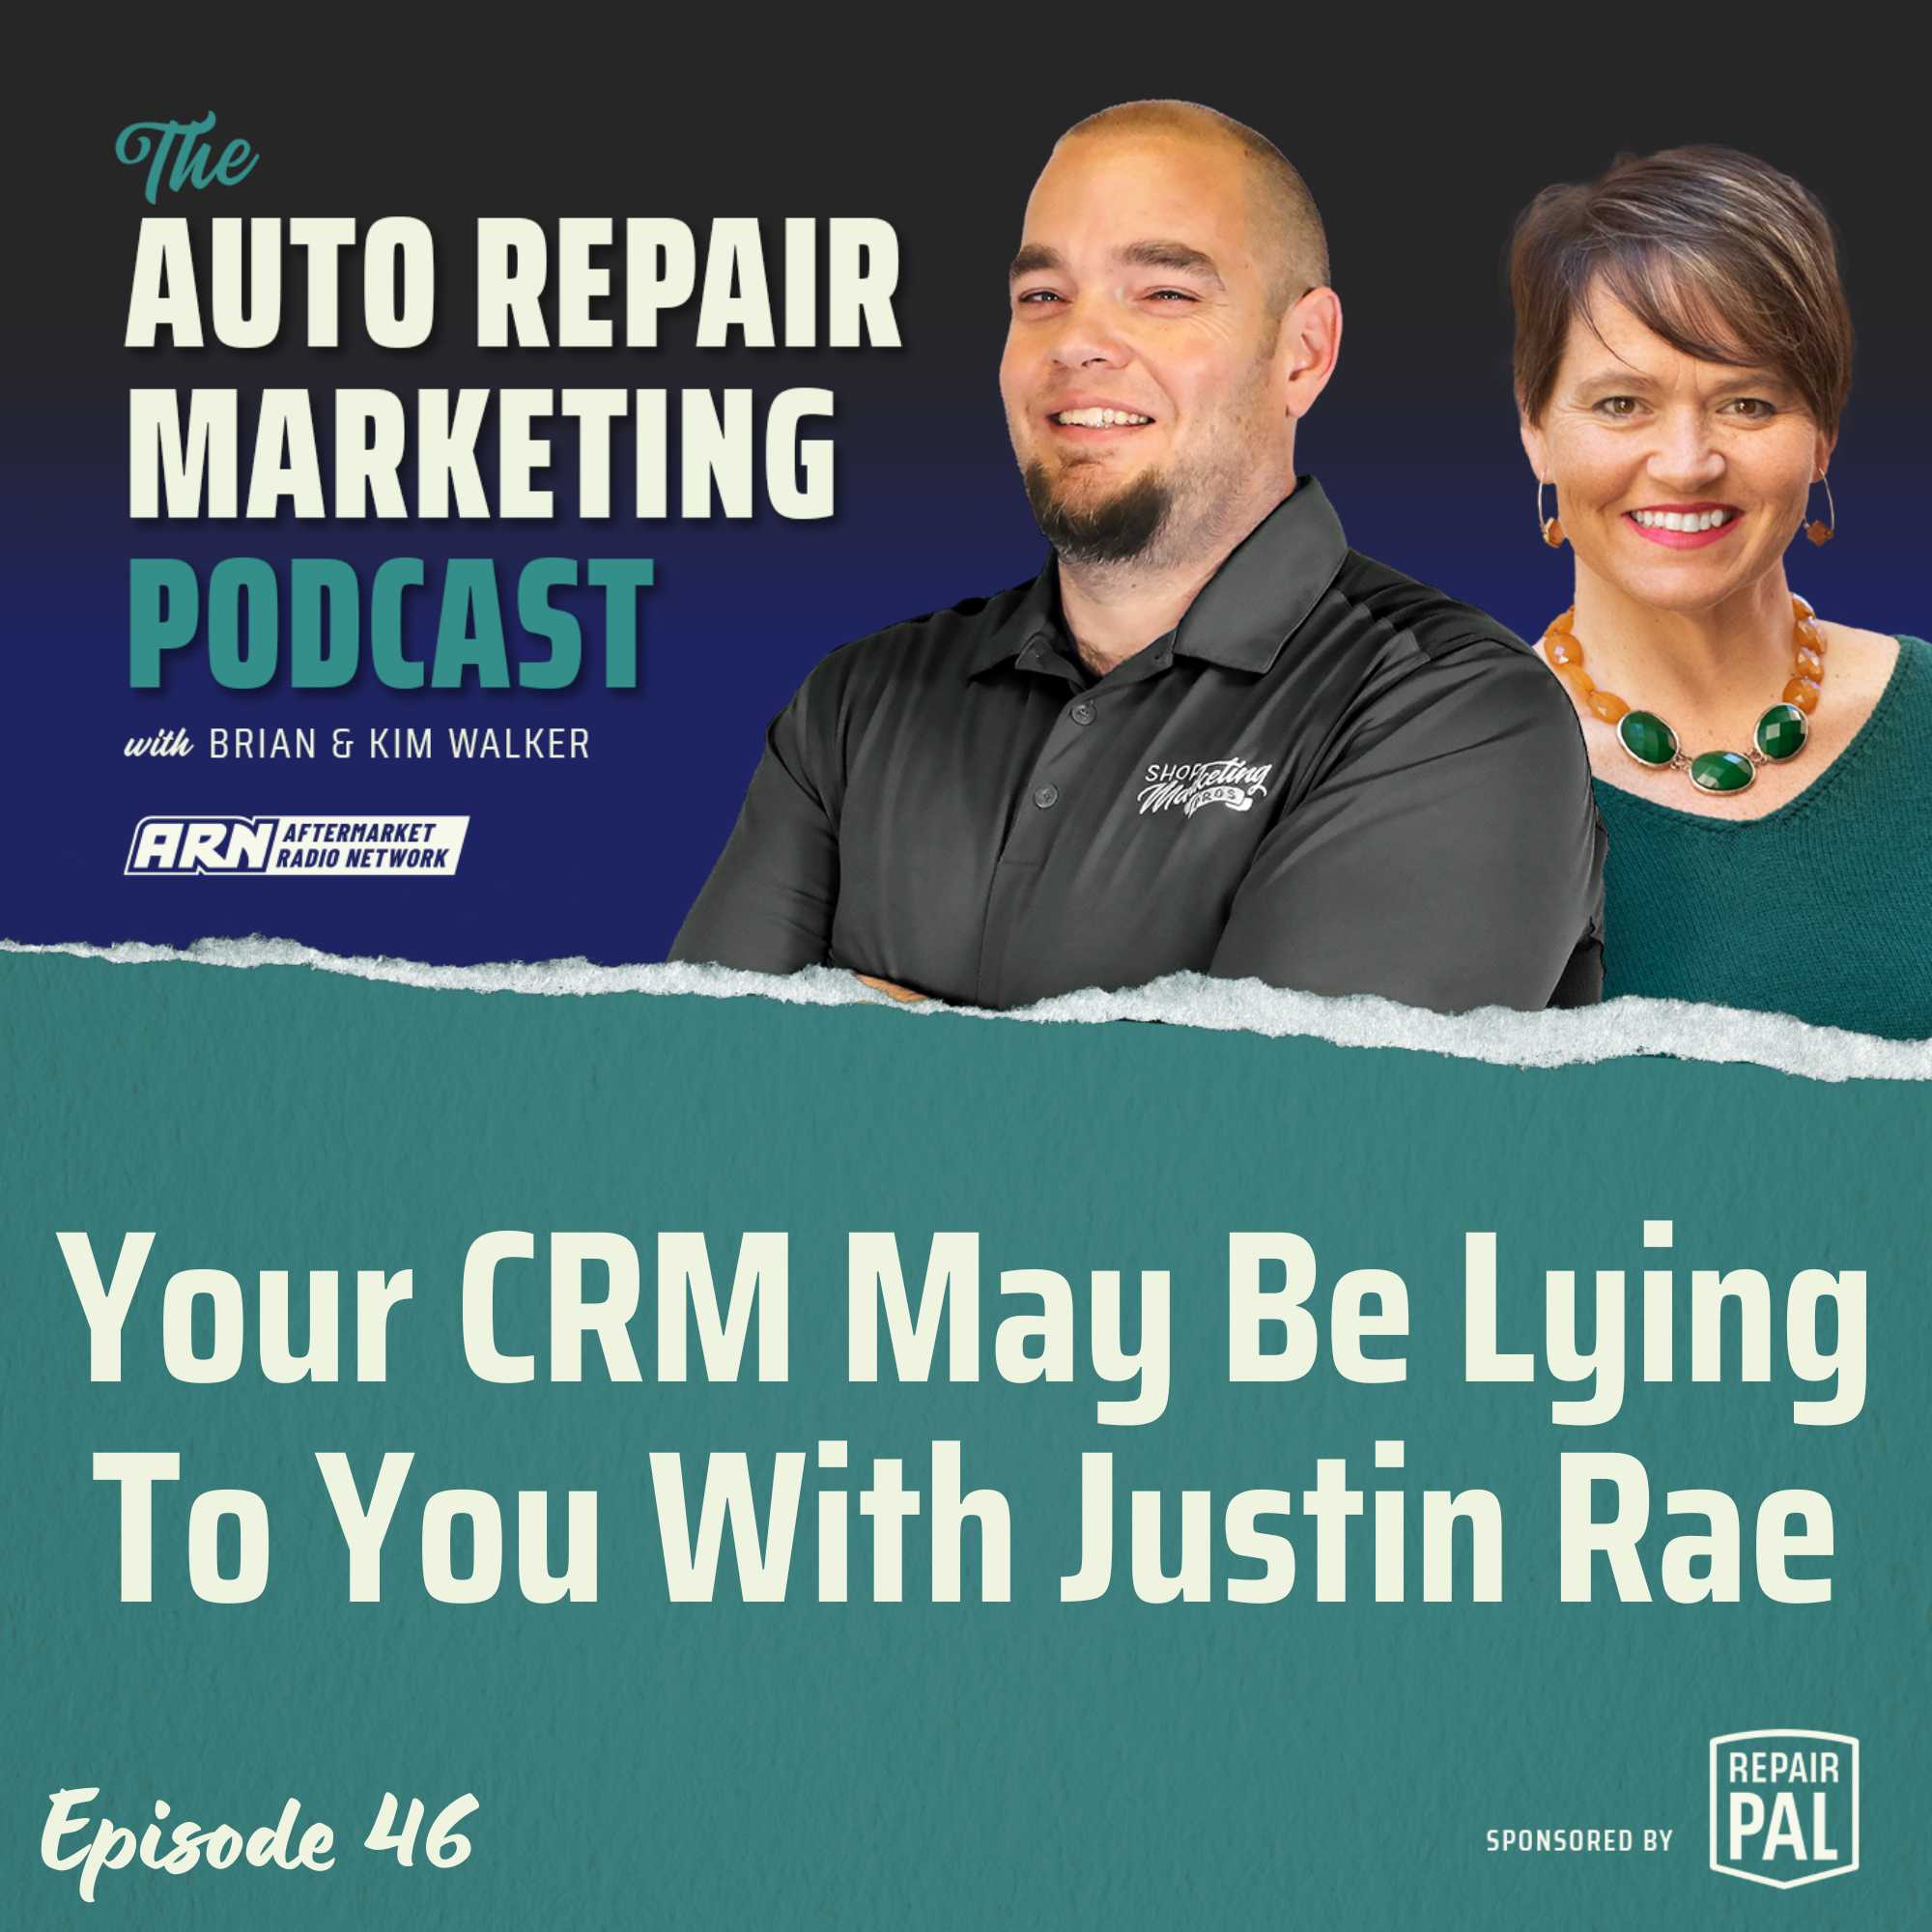 The Auto Repair Marketing Podcast Episode 46. Brian & Kim Walker talking about the topic "Your CRM May Be Lying To You w/ Justin Rae". Sponsored by Repair Pal.